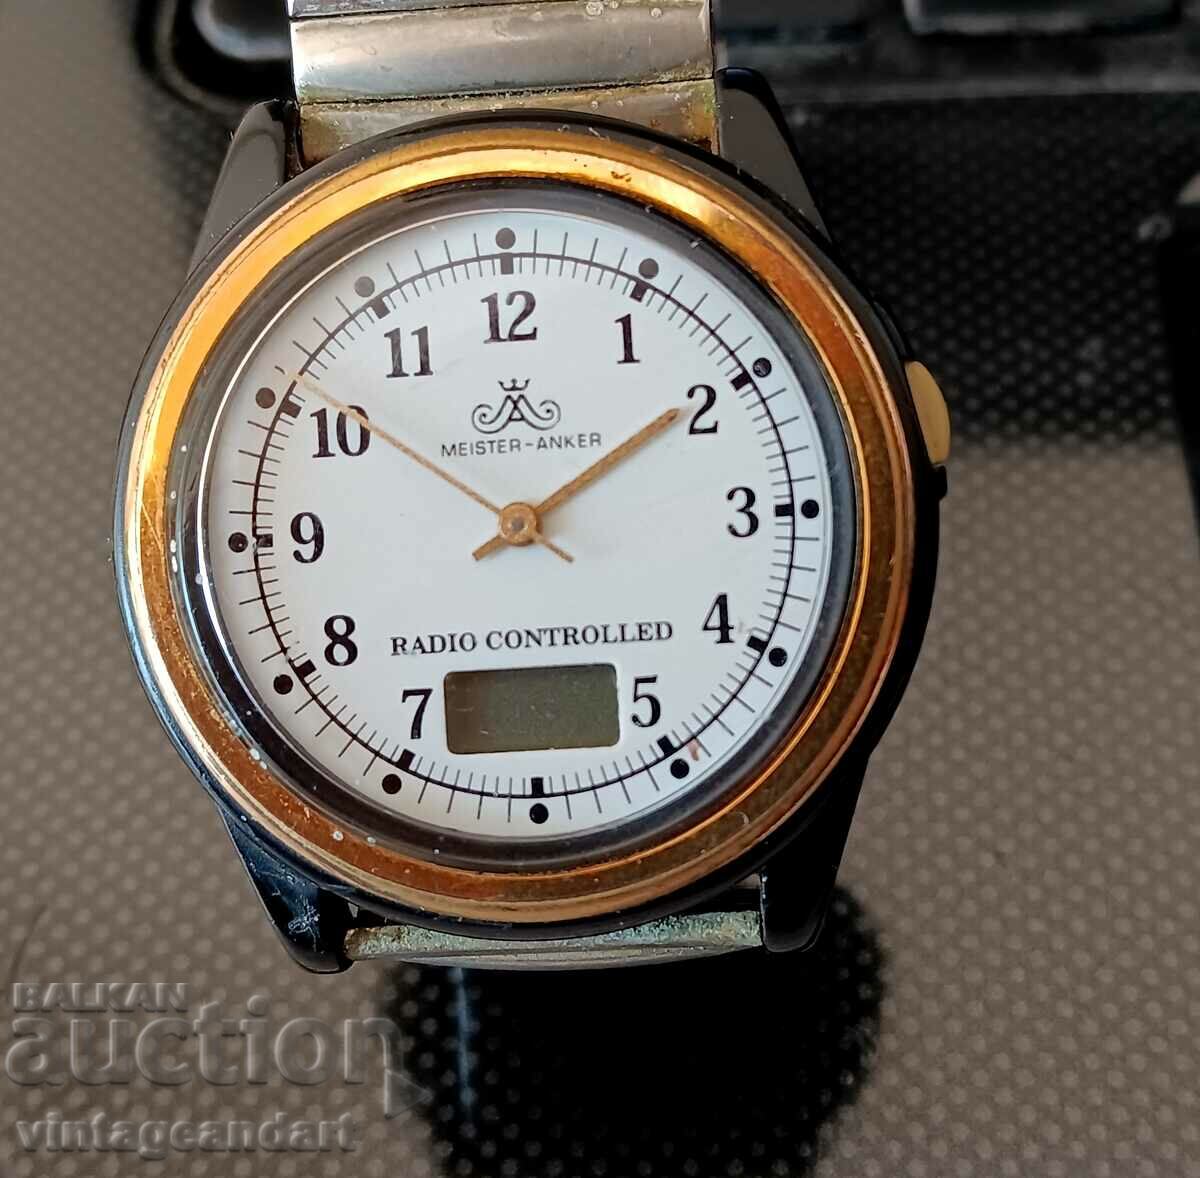 Meister Anker watch, radio controlled